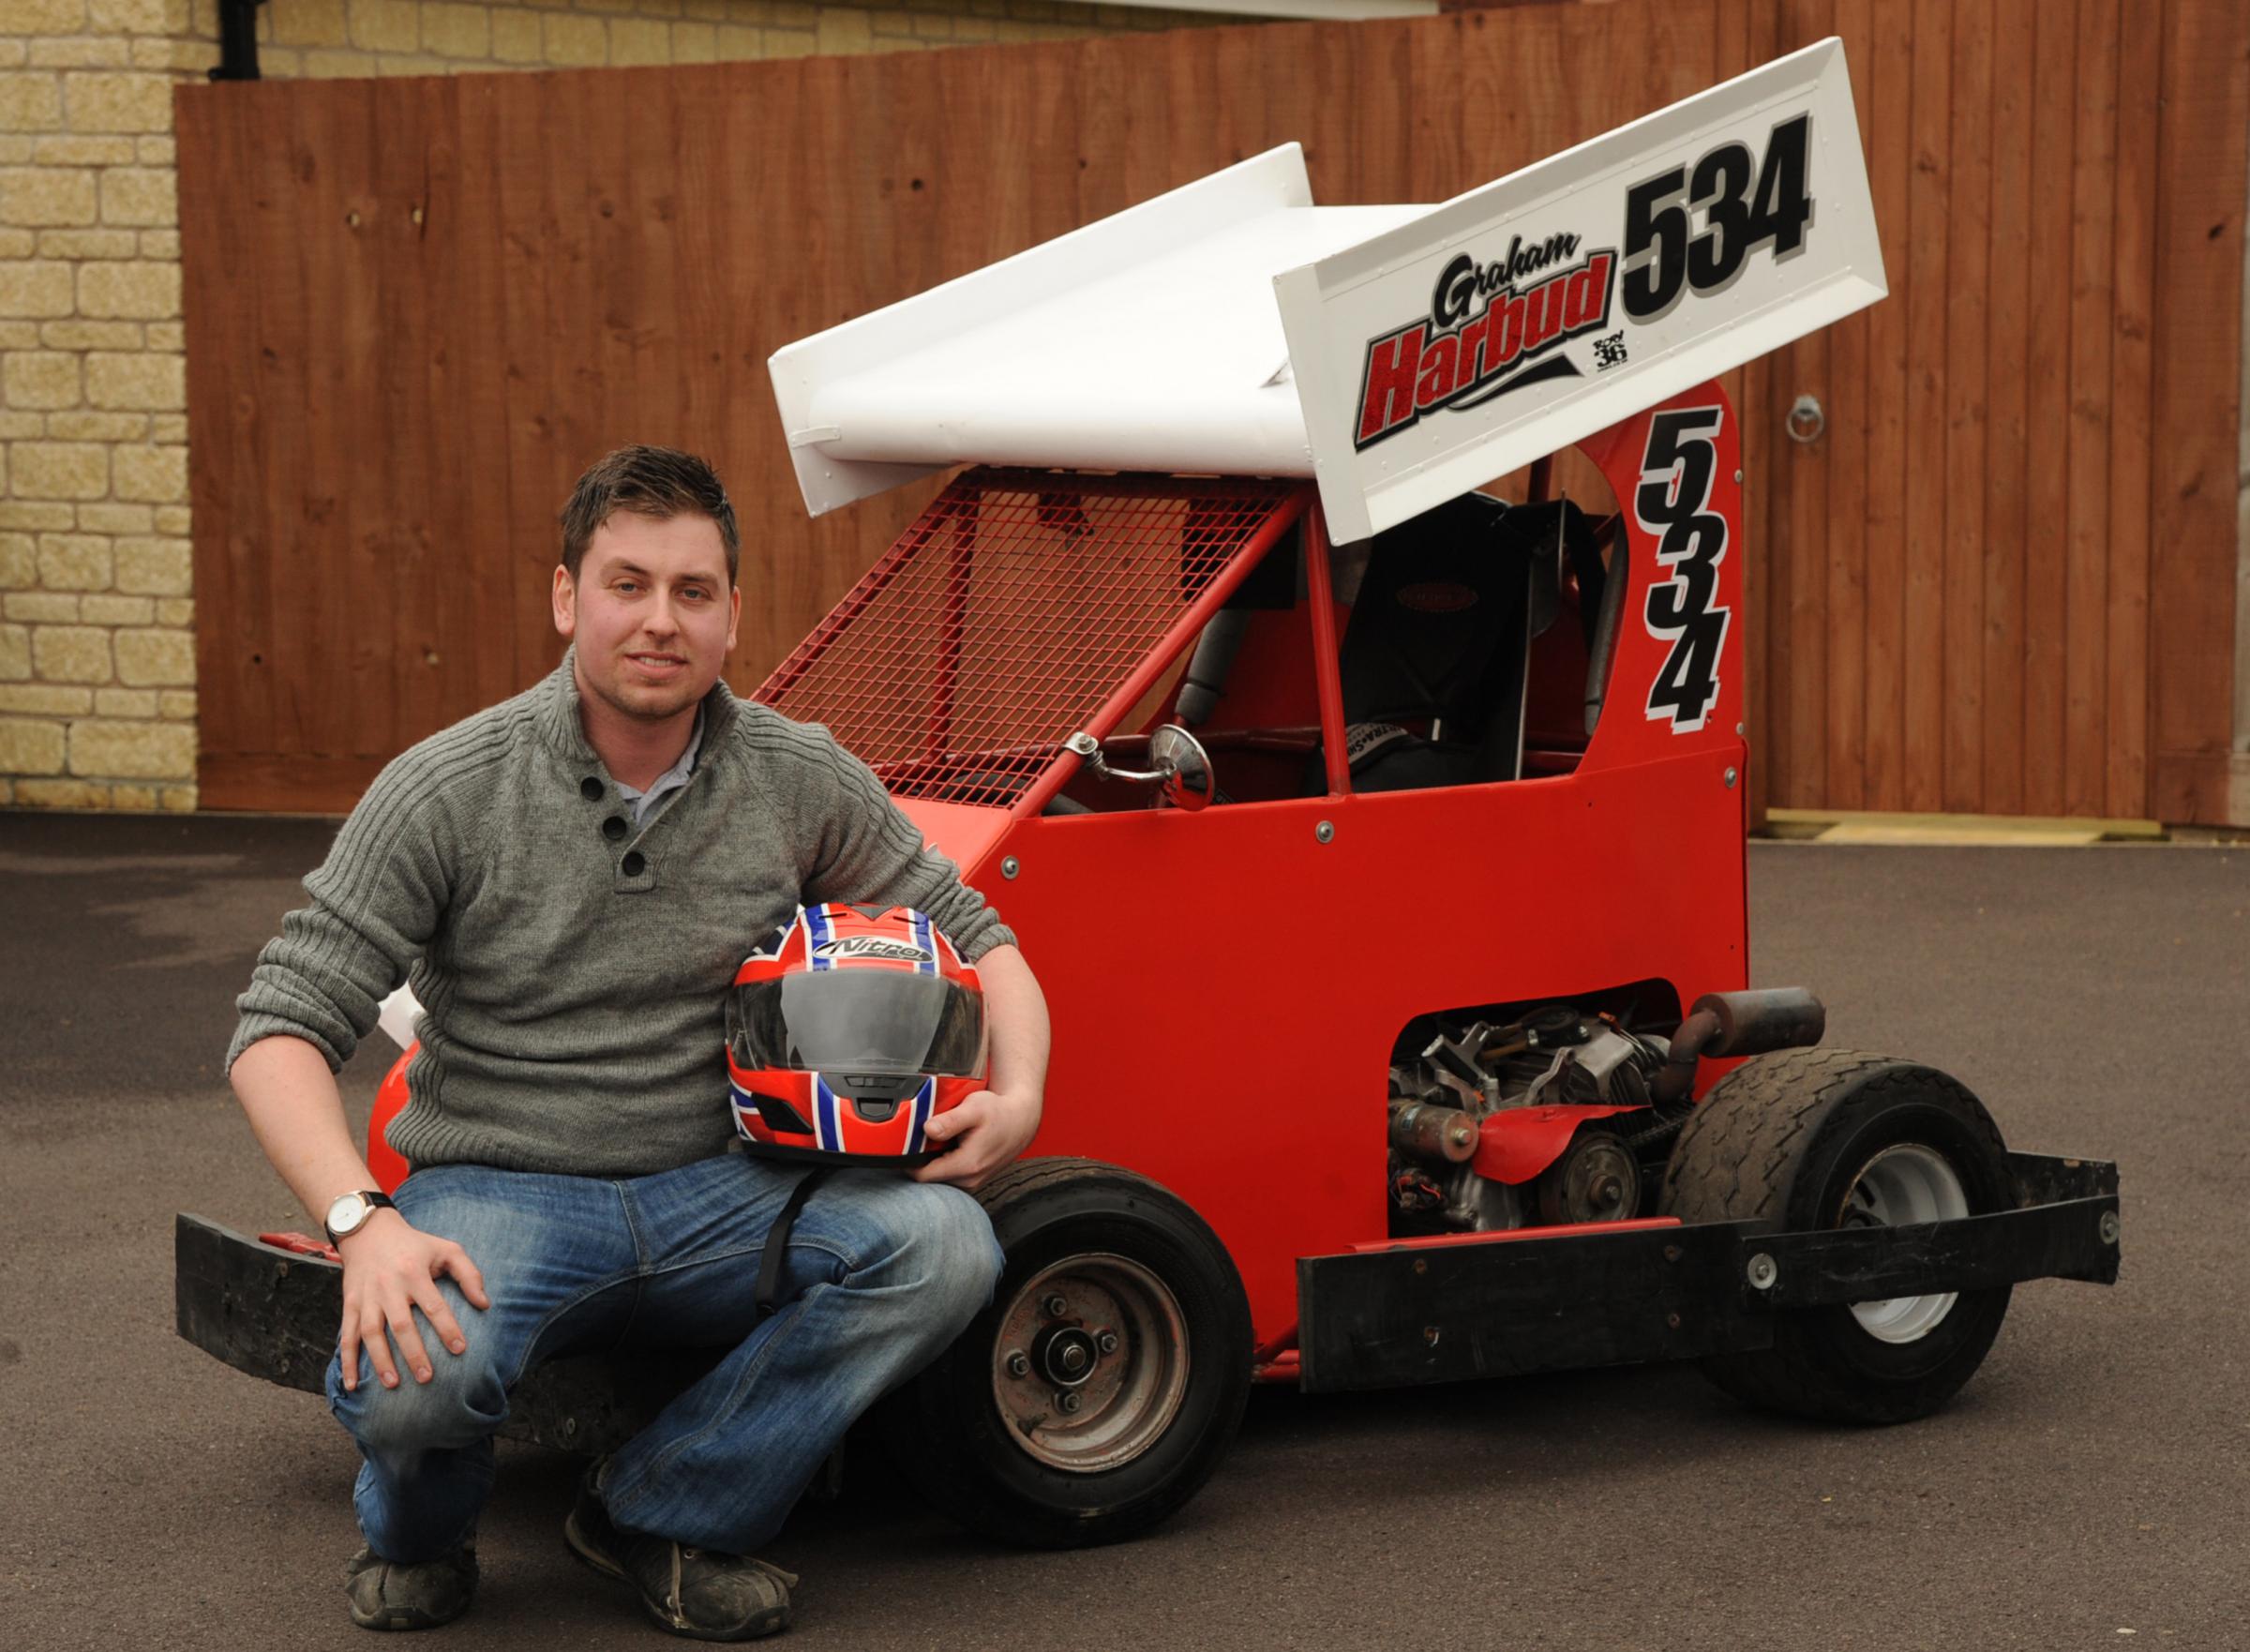 MOTORSPORT: Racer Harbud takes Stox - Wiltshire Times